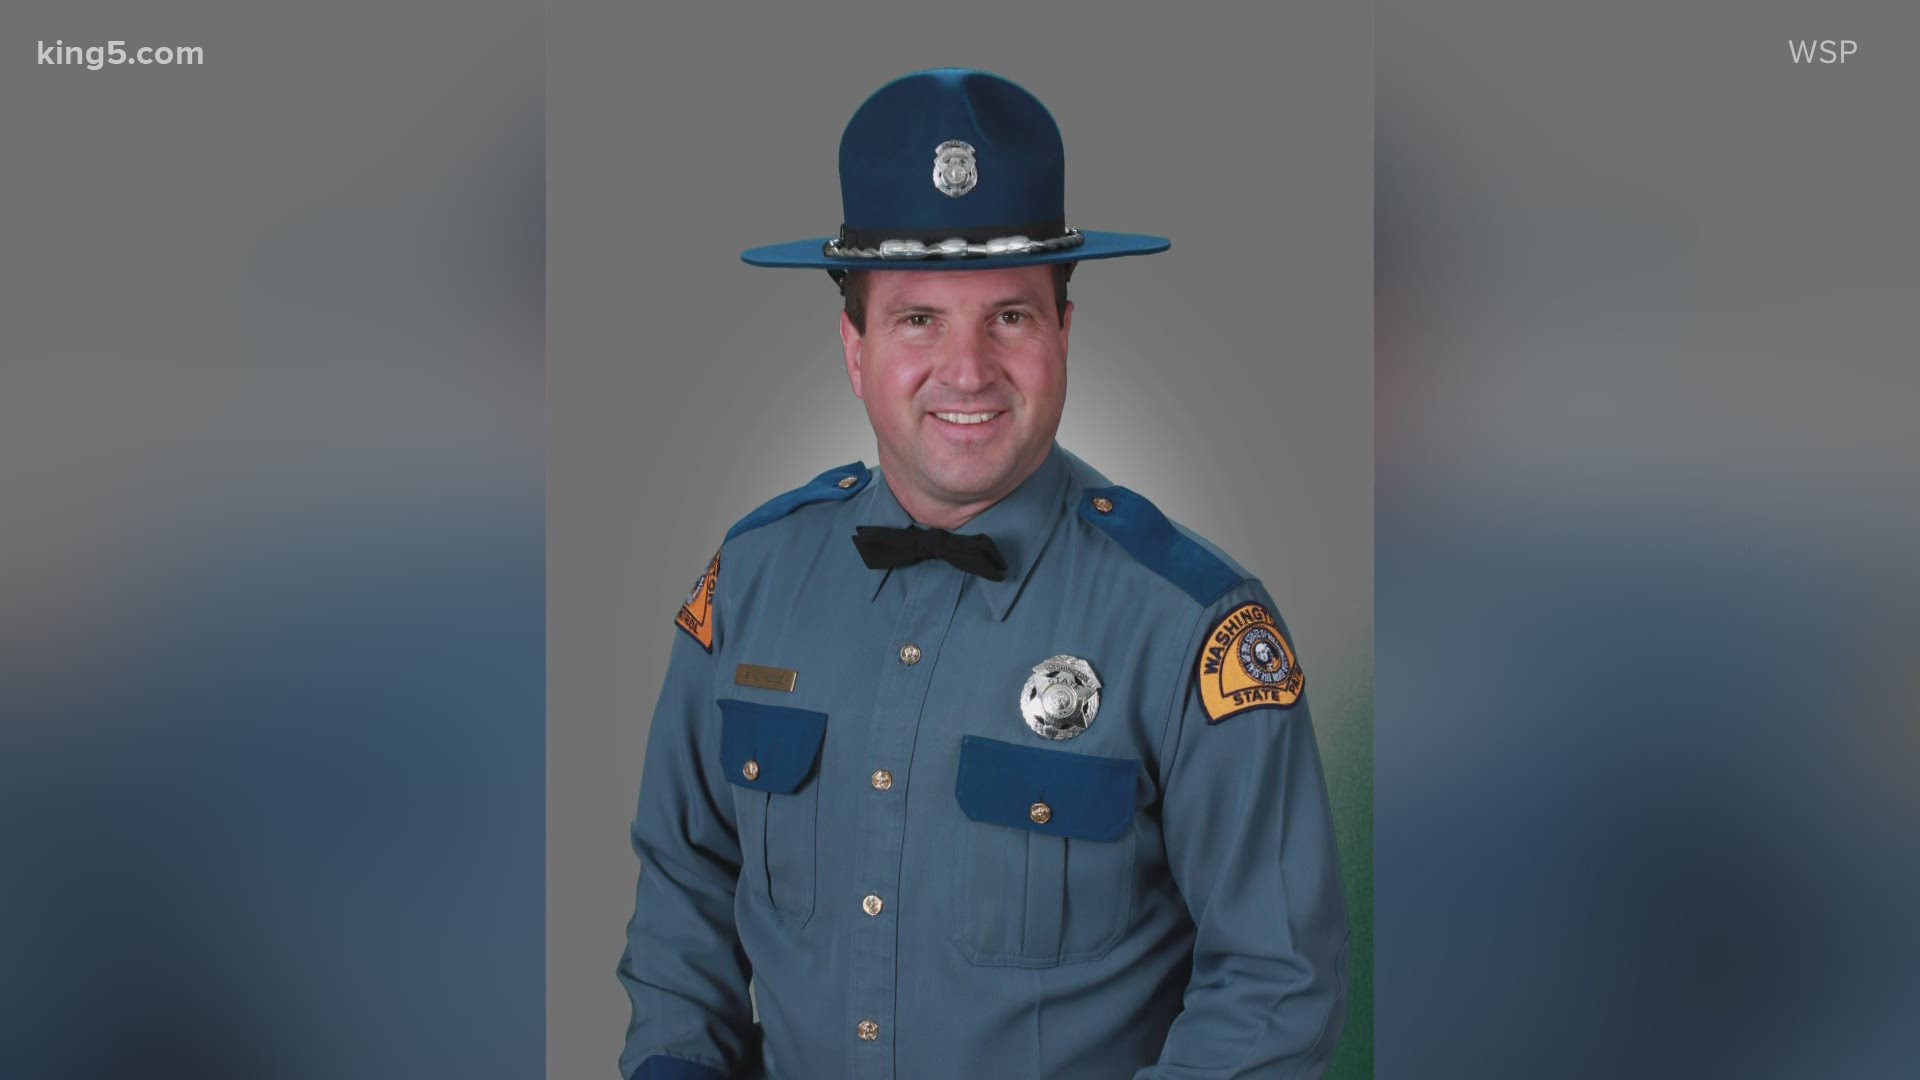 The Washington State Patrol confirmed 51-year-old Trooper Steve Houle died after being overcome by an avalanche near the French Cabin Creek area in Kittitas County.